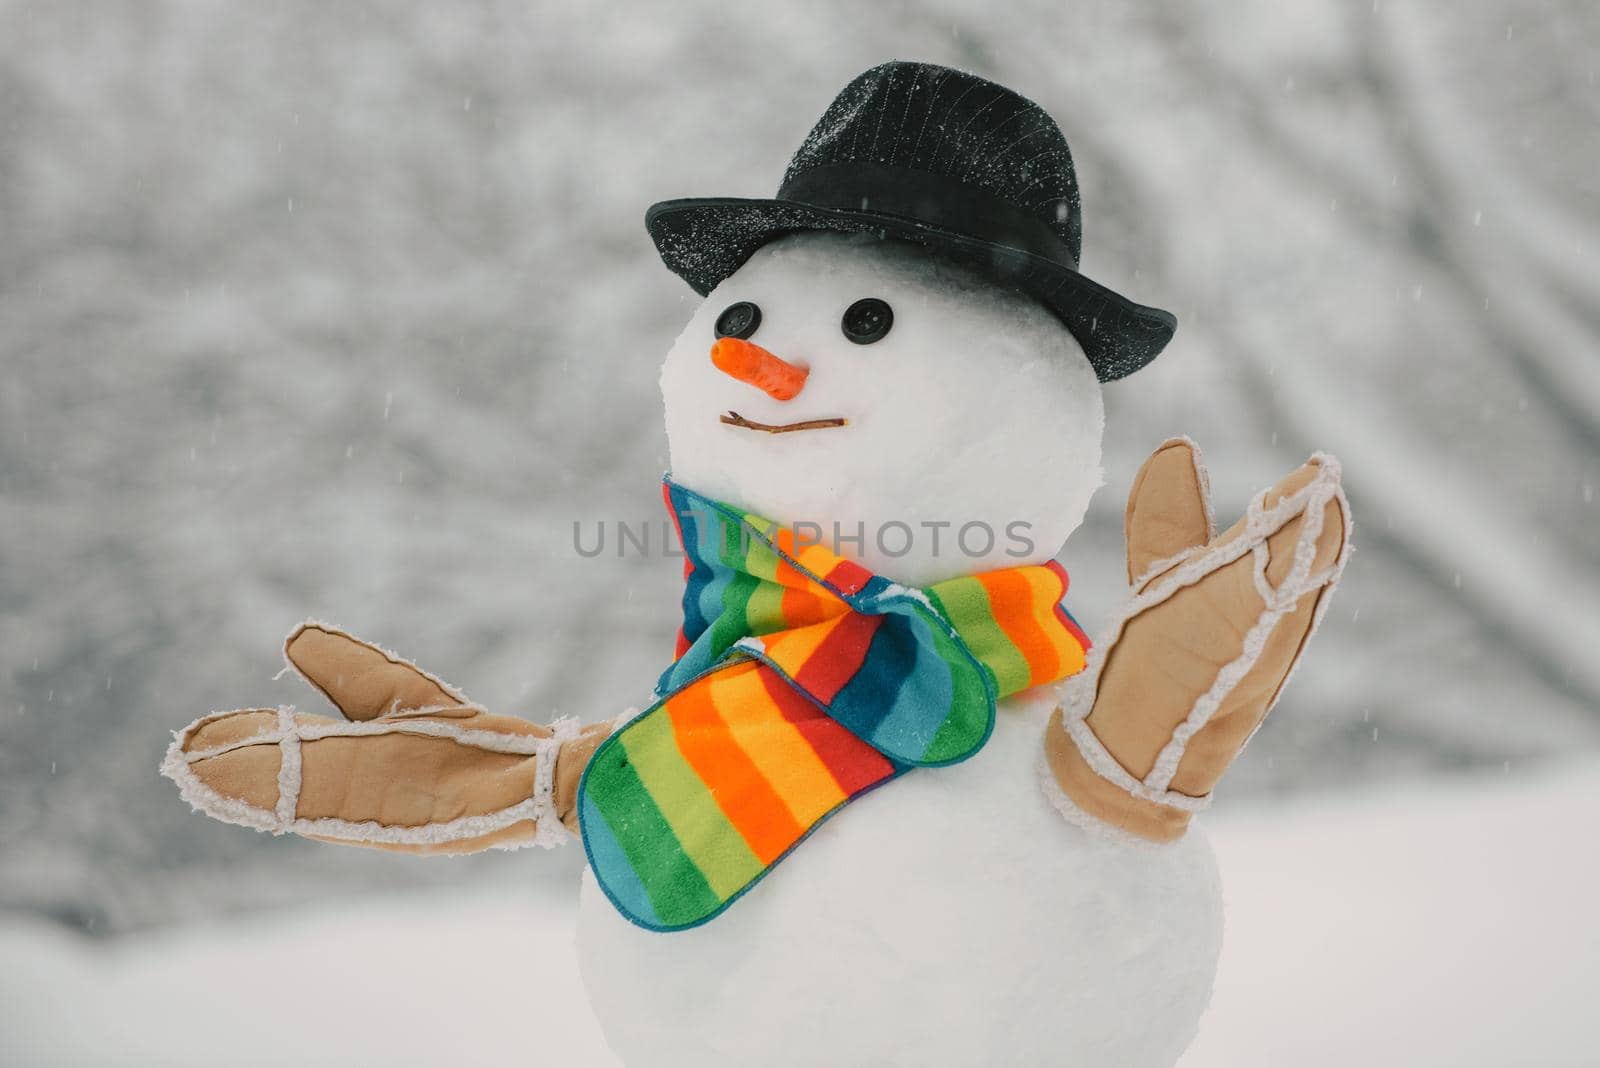 Snowman with hat and scarf in winter outdoor. Happy smiling snow man on sunny winter day. Christmas card